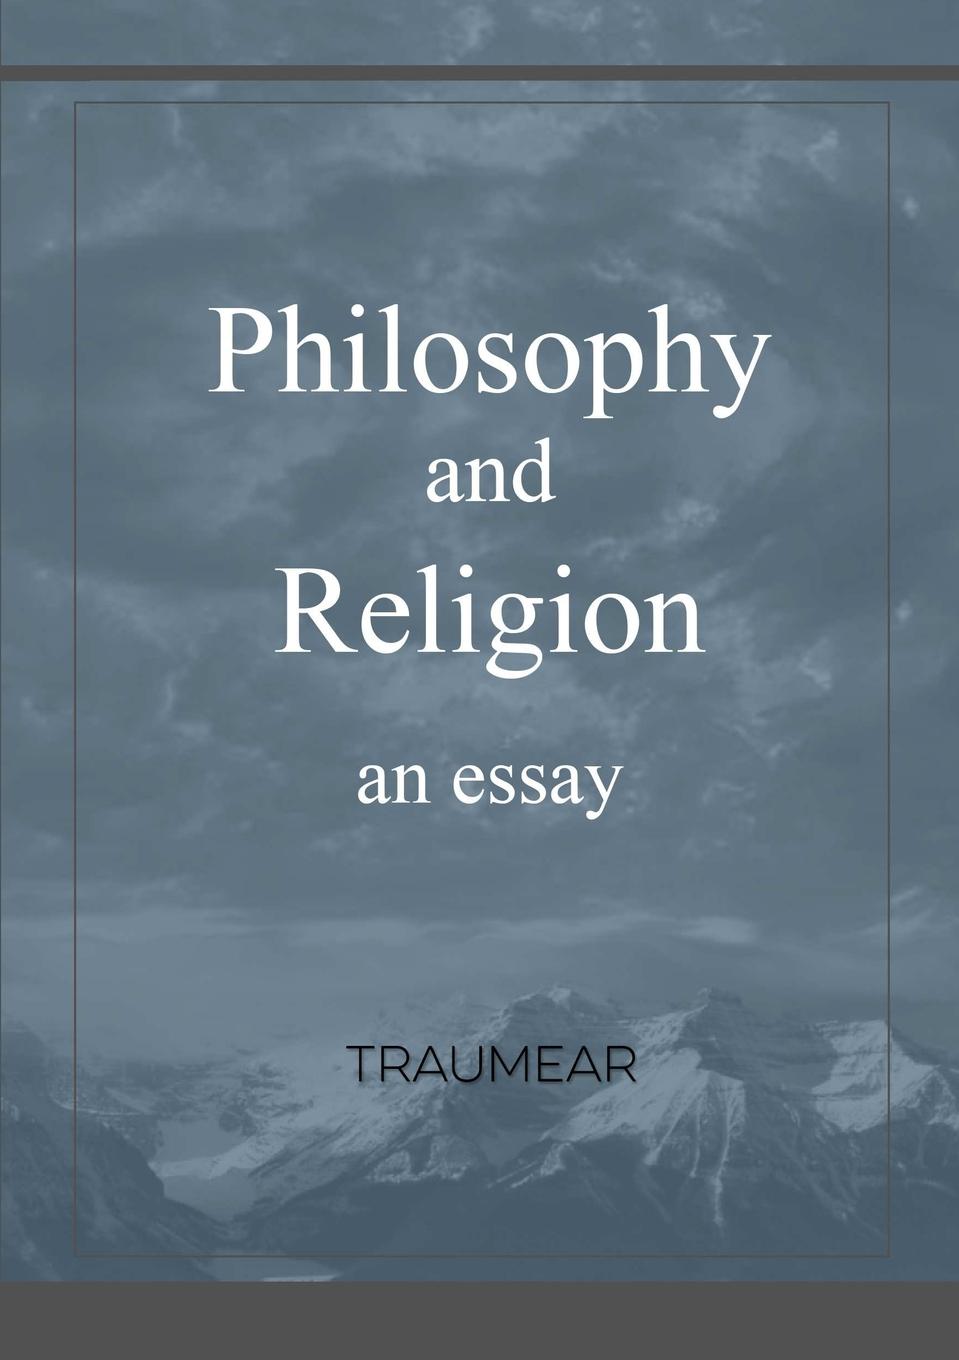 Traumear Philosophy and Religion